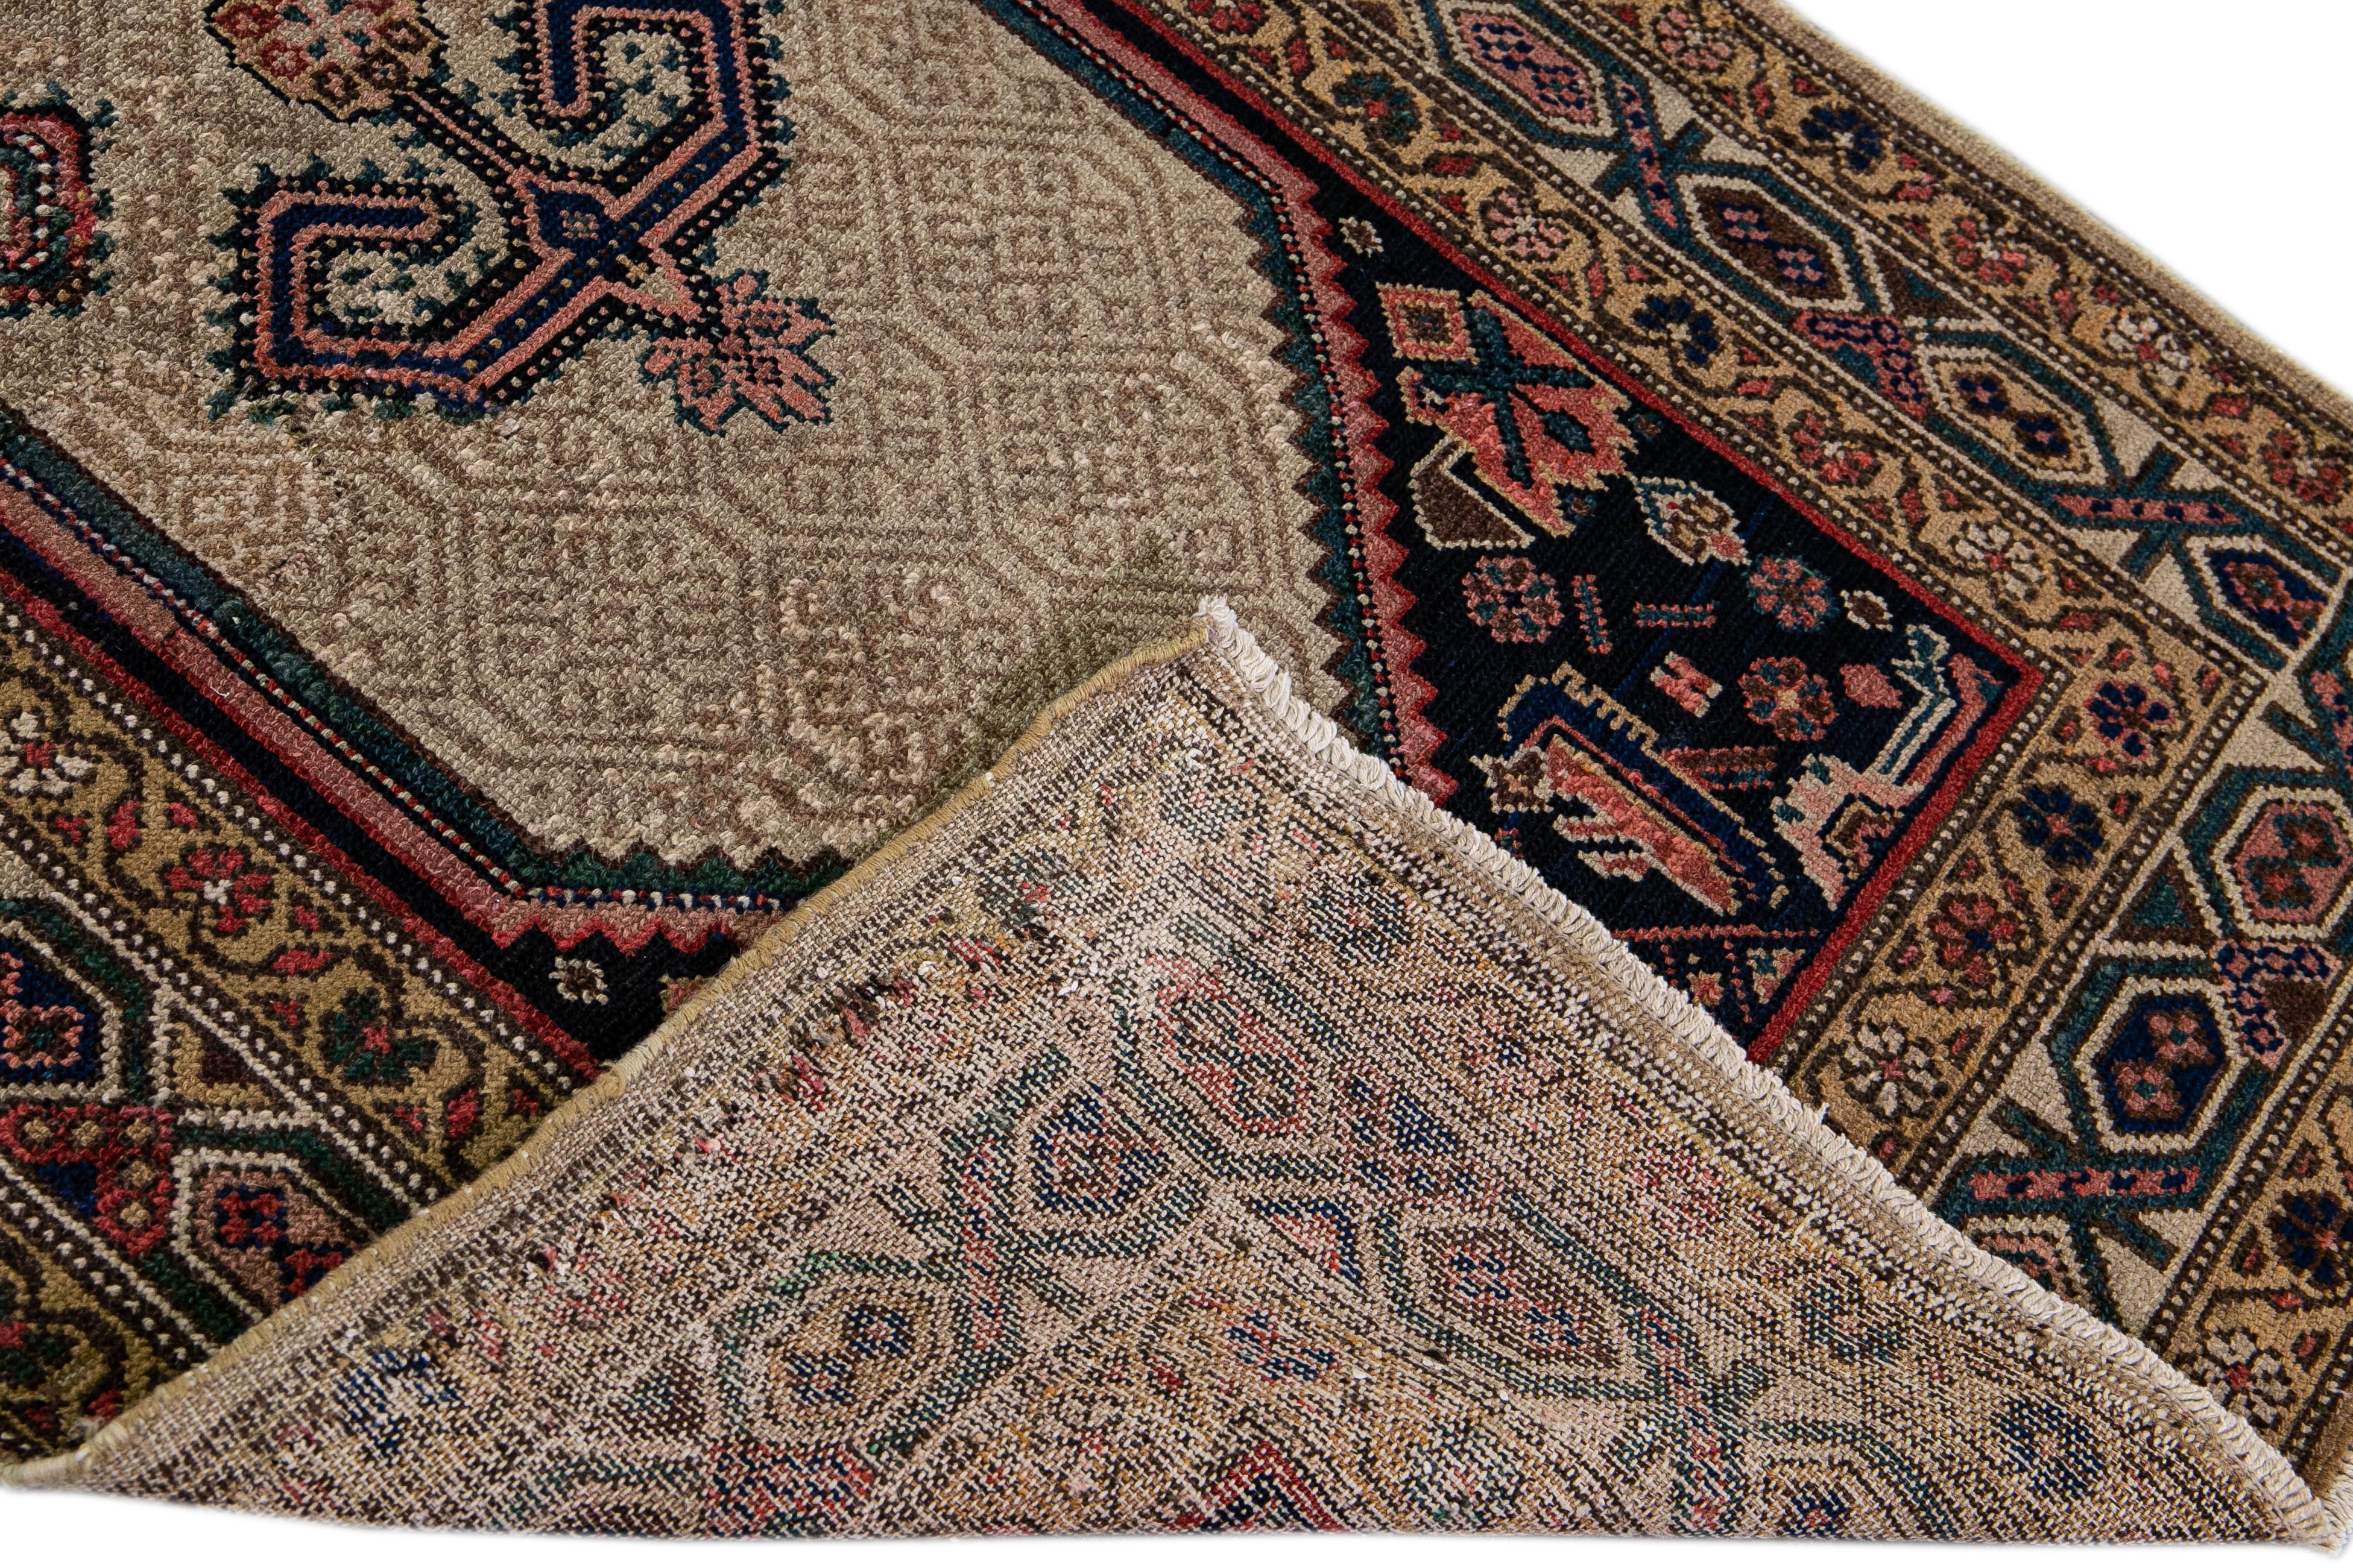 Beautiful antique Hamadan hand-knotted wool runner with a brown and beige field. This Persian runner has a geometric medallion design in complementary colors. 

This rug measures: 3'1